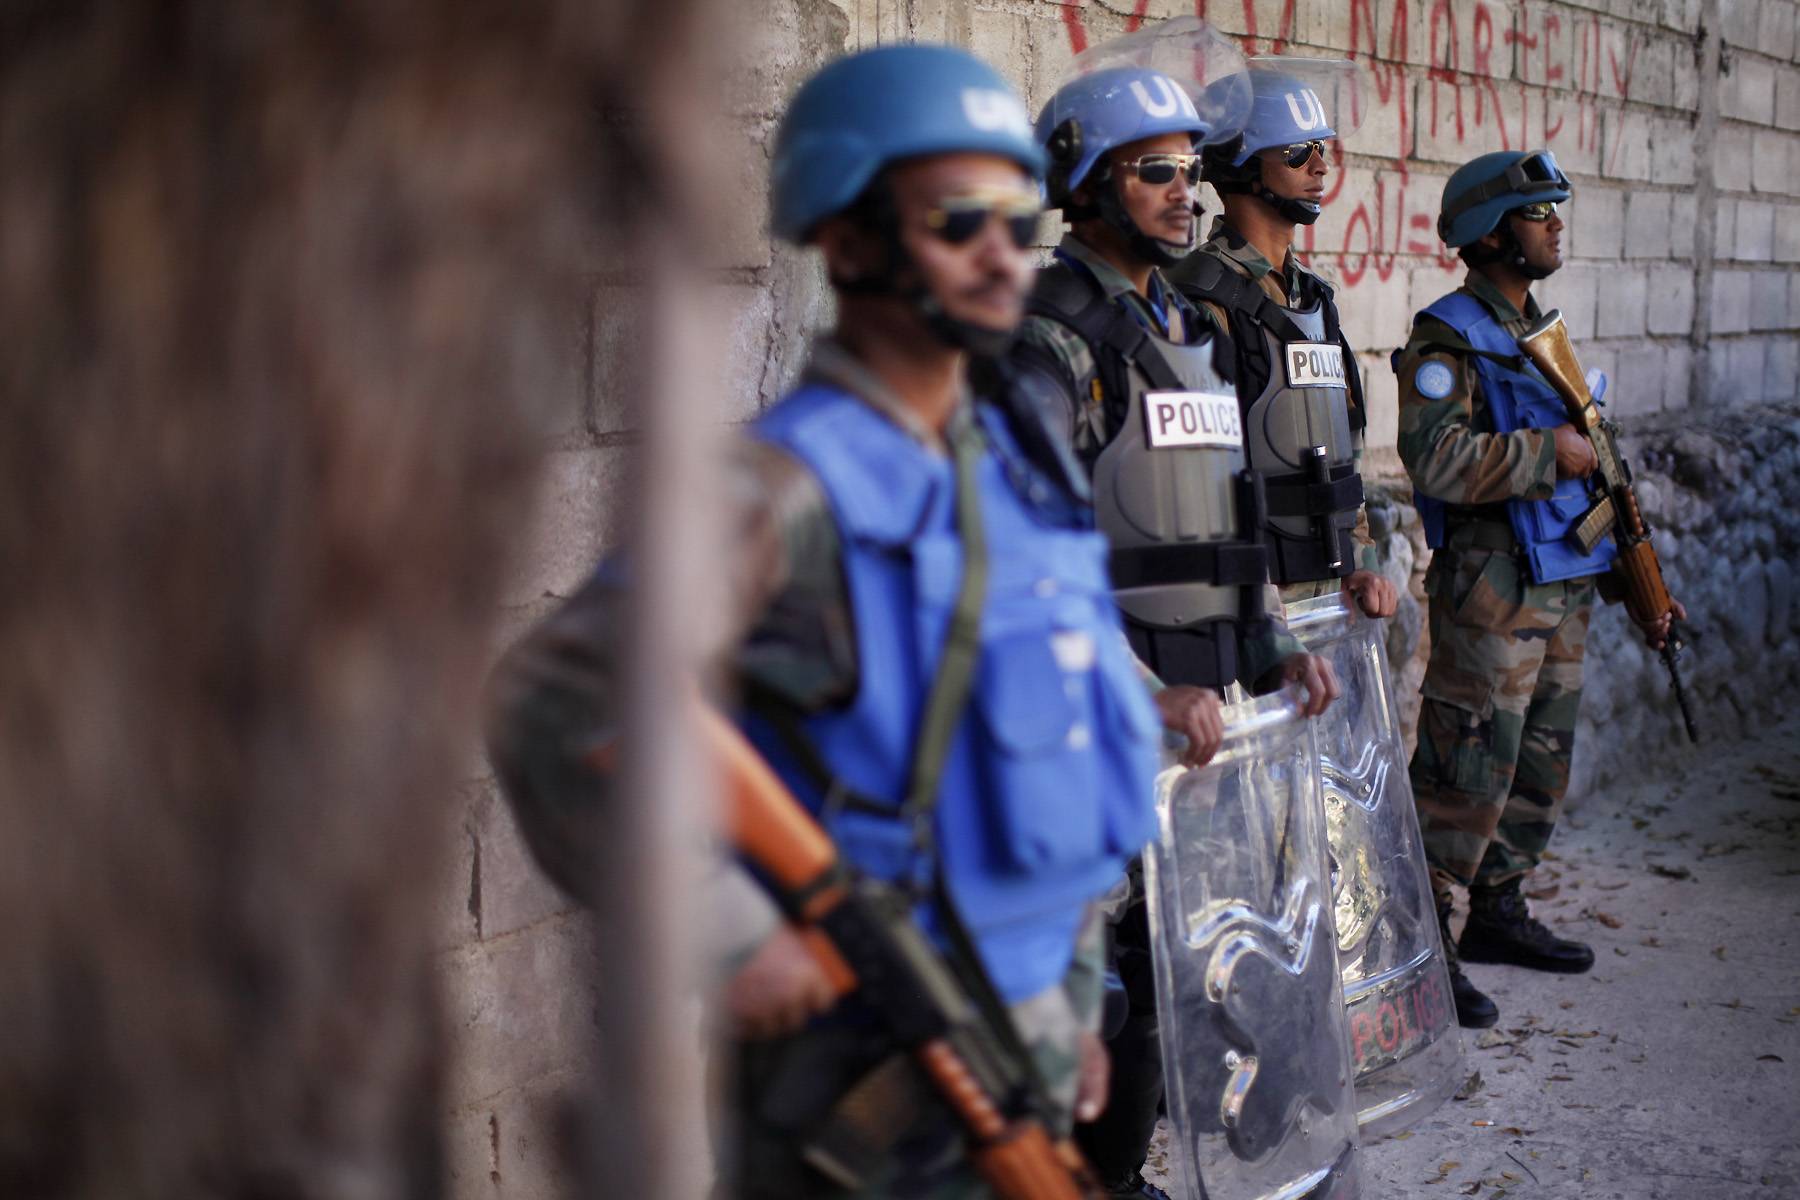 U.N. Says &quot;Rapid&quot; Justice Done in Haiti Rape Trial - The United Nations sentenced two Pakistani U.N. peacekeeping policemen to a year in prison with hard labor after a trial in Haiti found them guilty of&nbsp;sexual abuse and exploitation.(Photo: REUTERS/Eduardo Munoz)